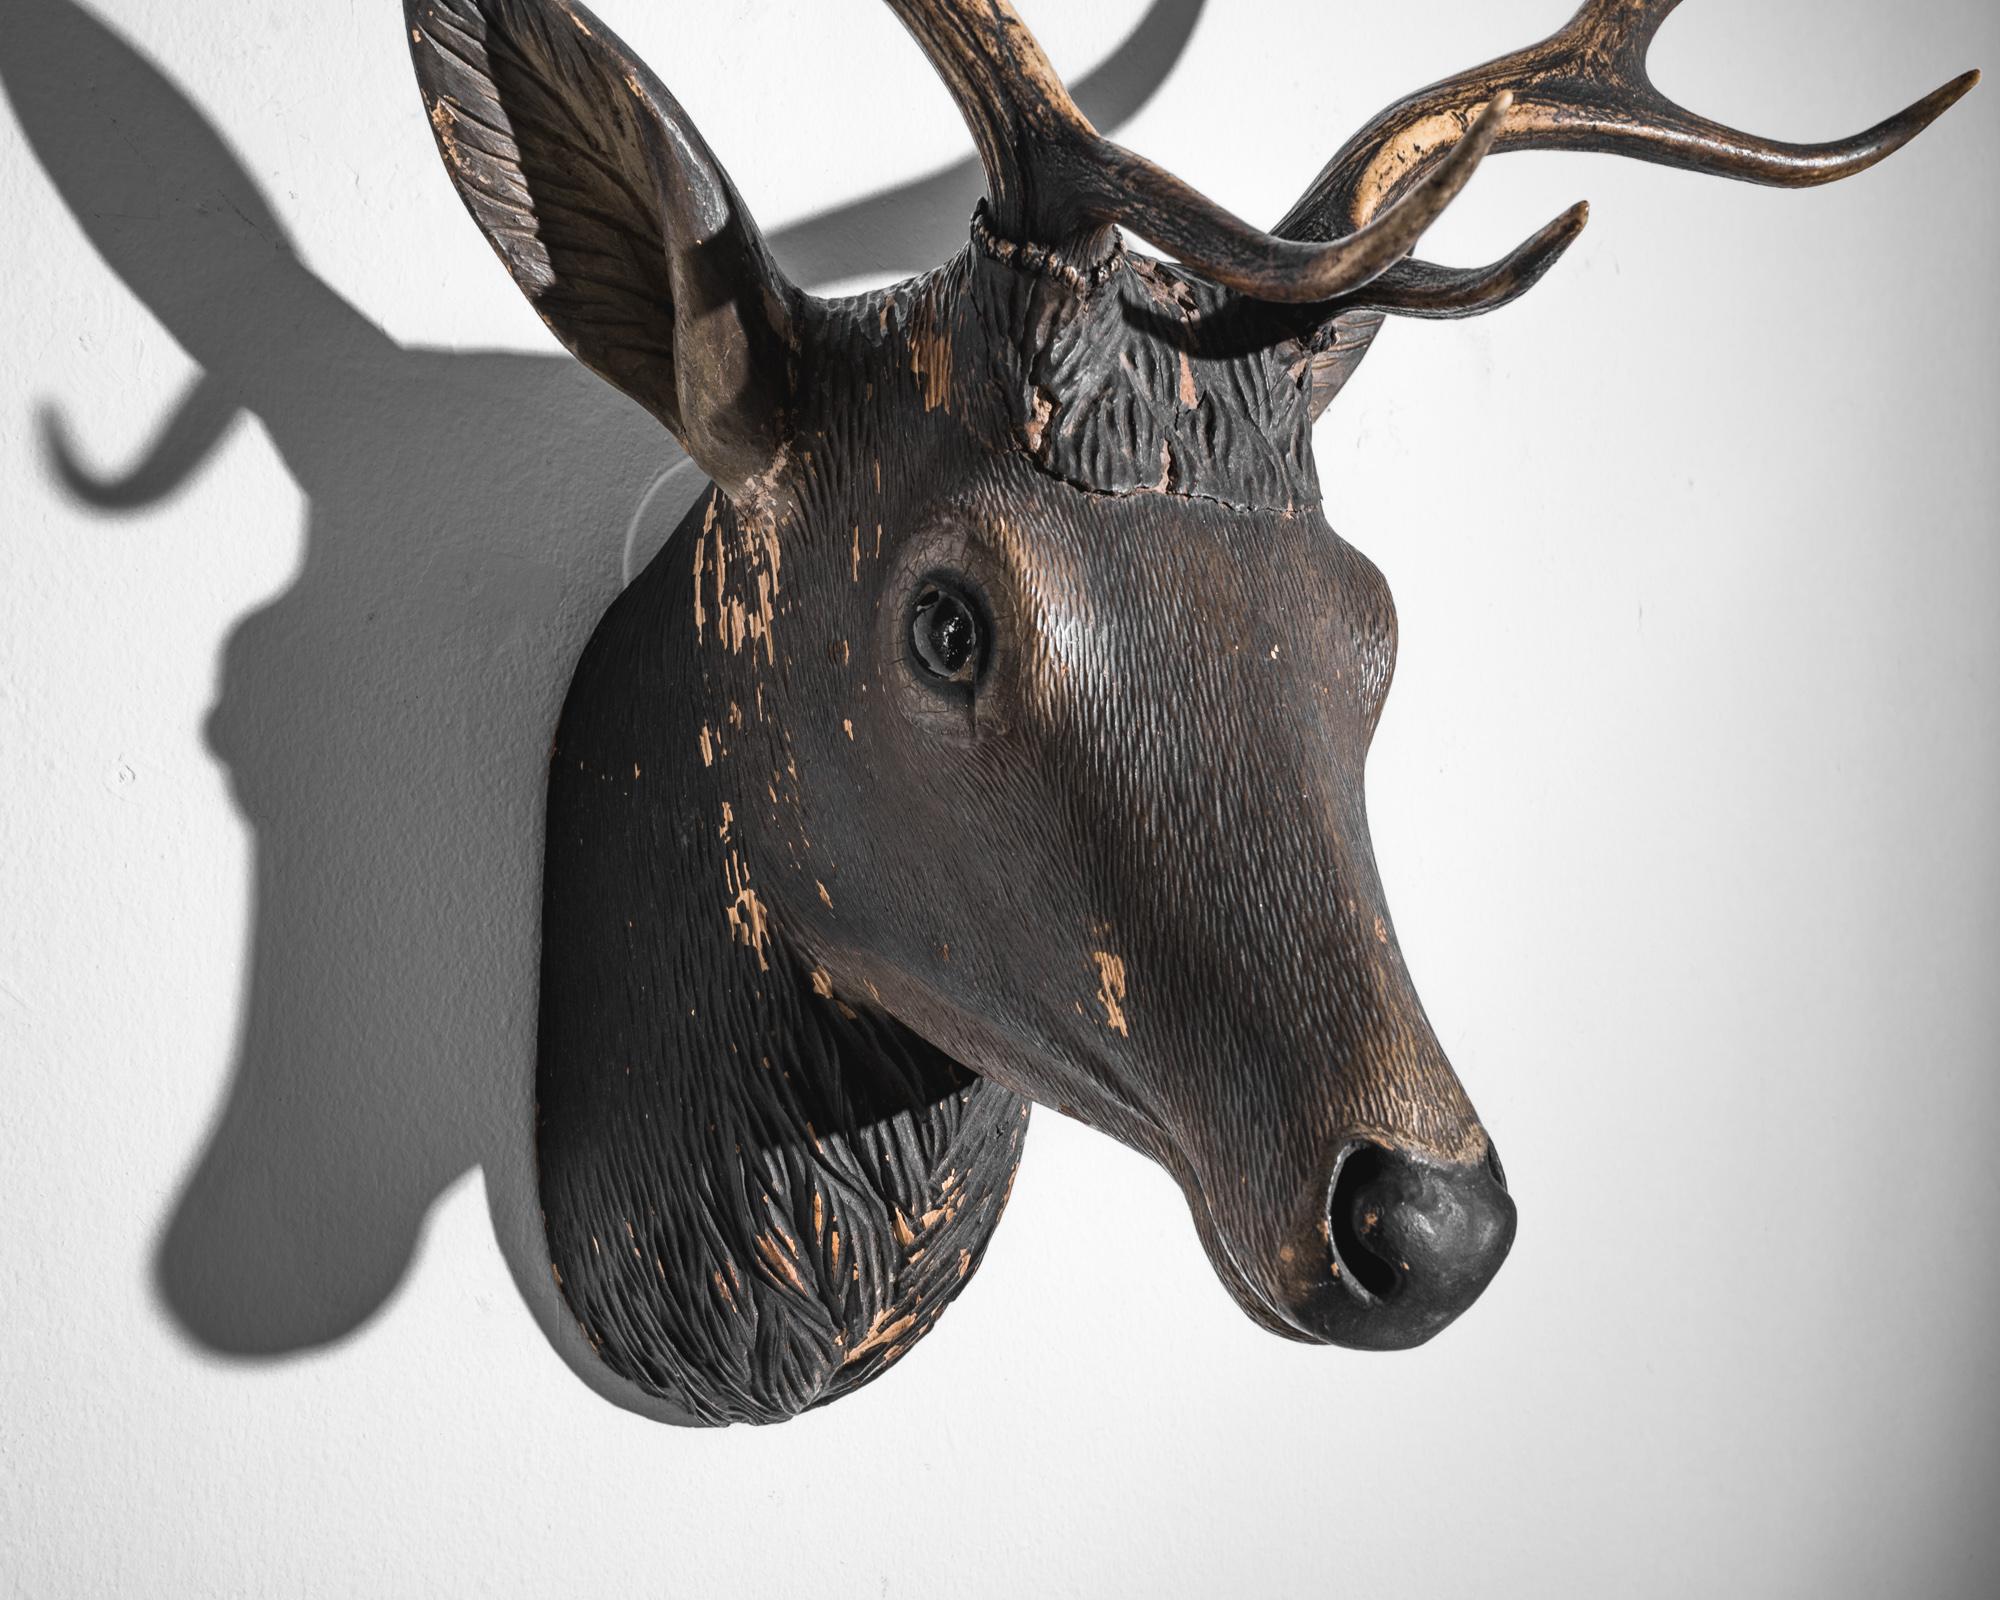 Add a touch of alpine tradition to your décor with this early 1900s Austrian wooden deer decoration. Exquisitely carved with attention to detail, this piece captures the majestic beauty of a deer with its intricate antlers and serene expression. It